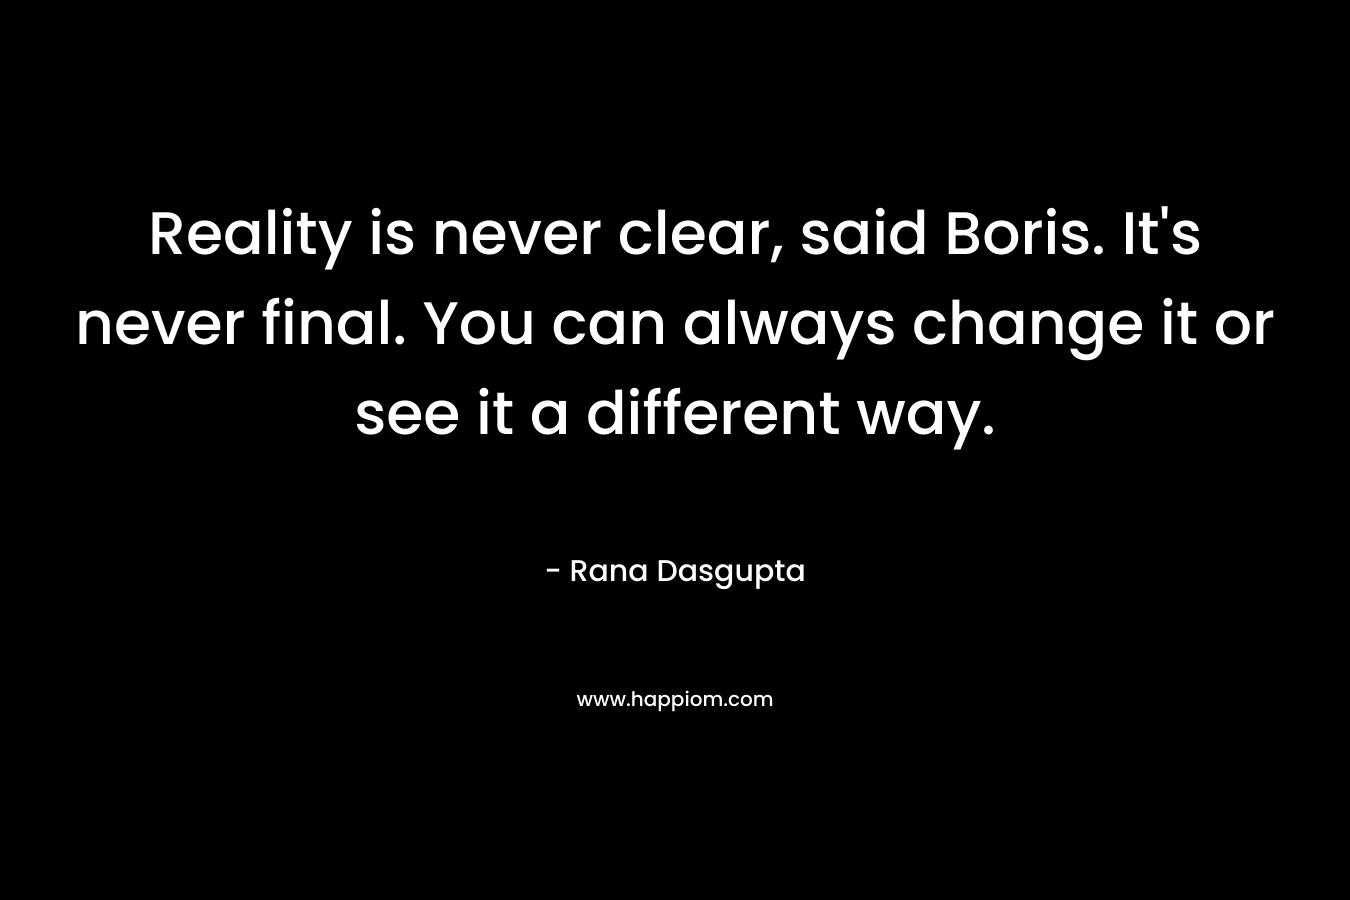 Reality is never clear, said Boris. It’s never final. You can always change it or see it a different way. – Rana Dasgupta